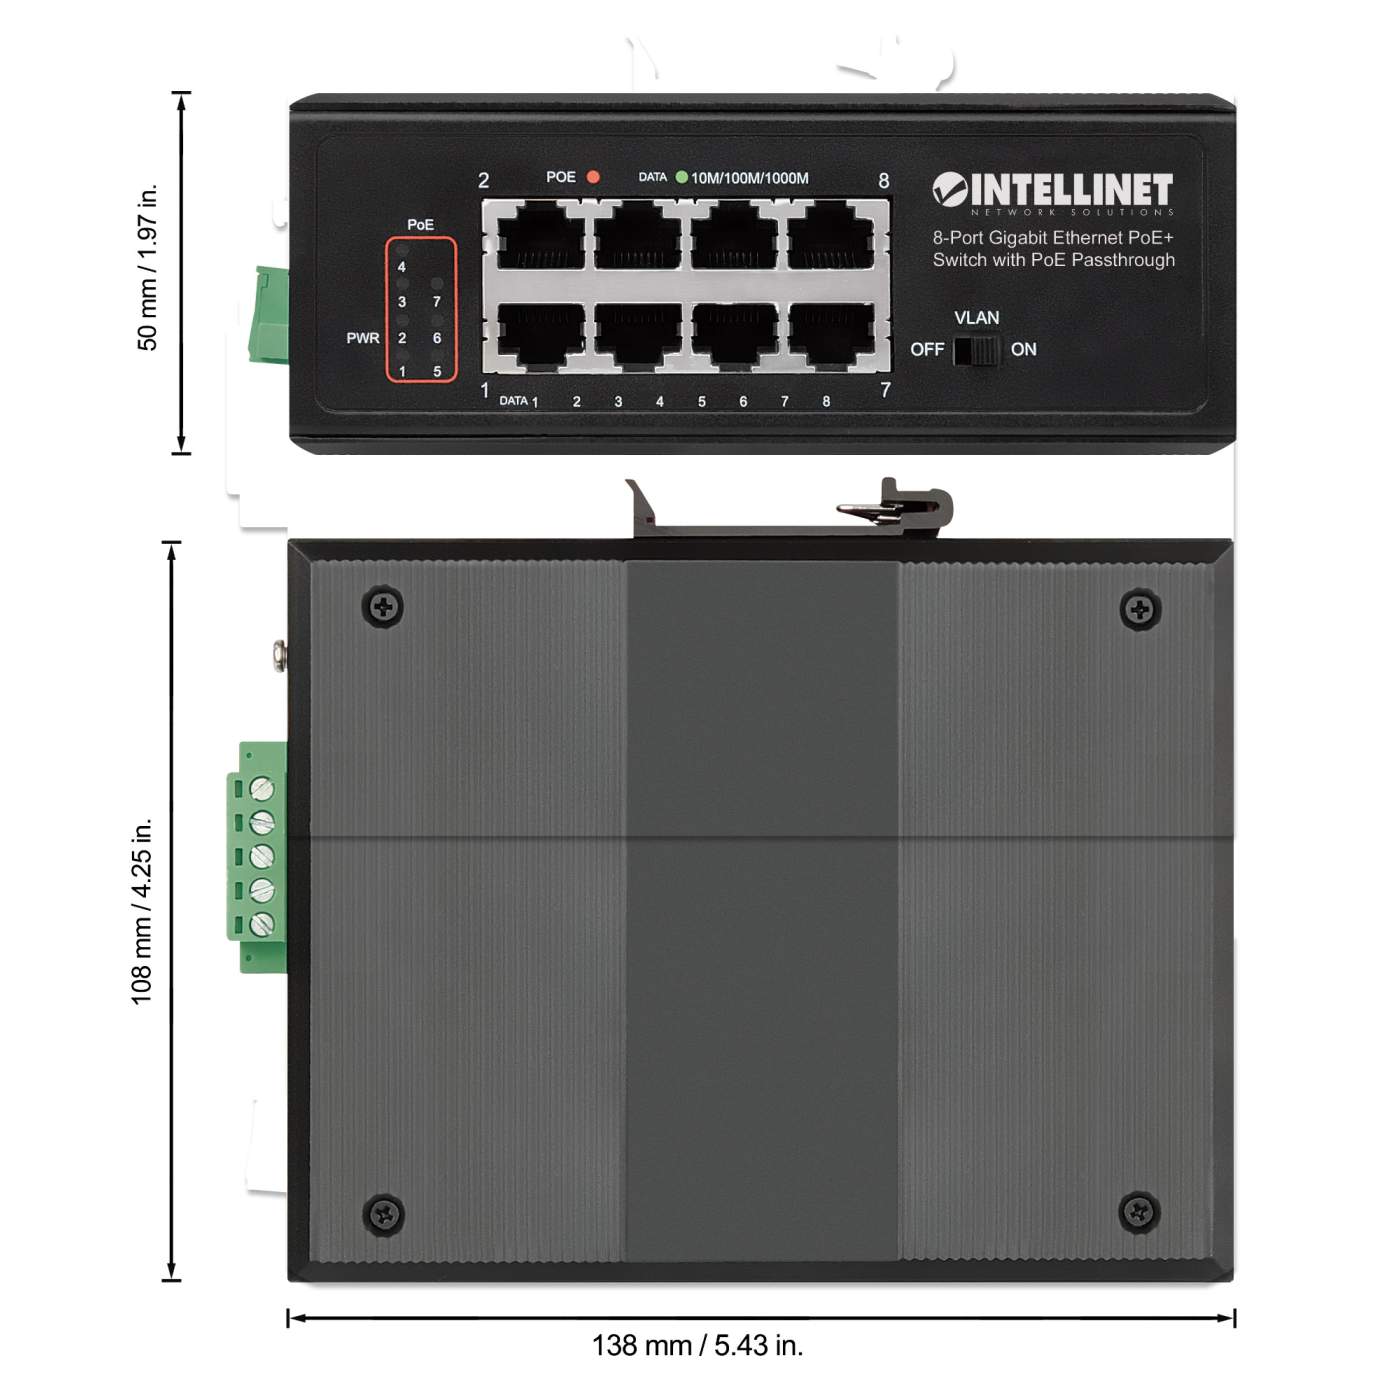 PoE-Powered 8-Port Gigabit Ethernet PoE+ Industrial Switch with PoE Passthrough Image 6